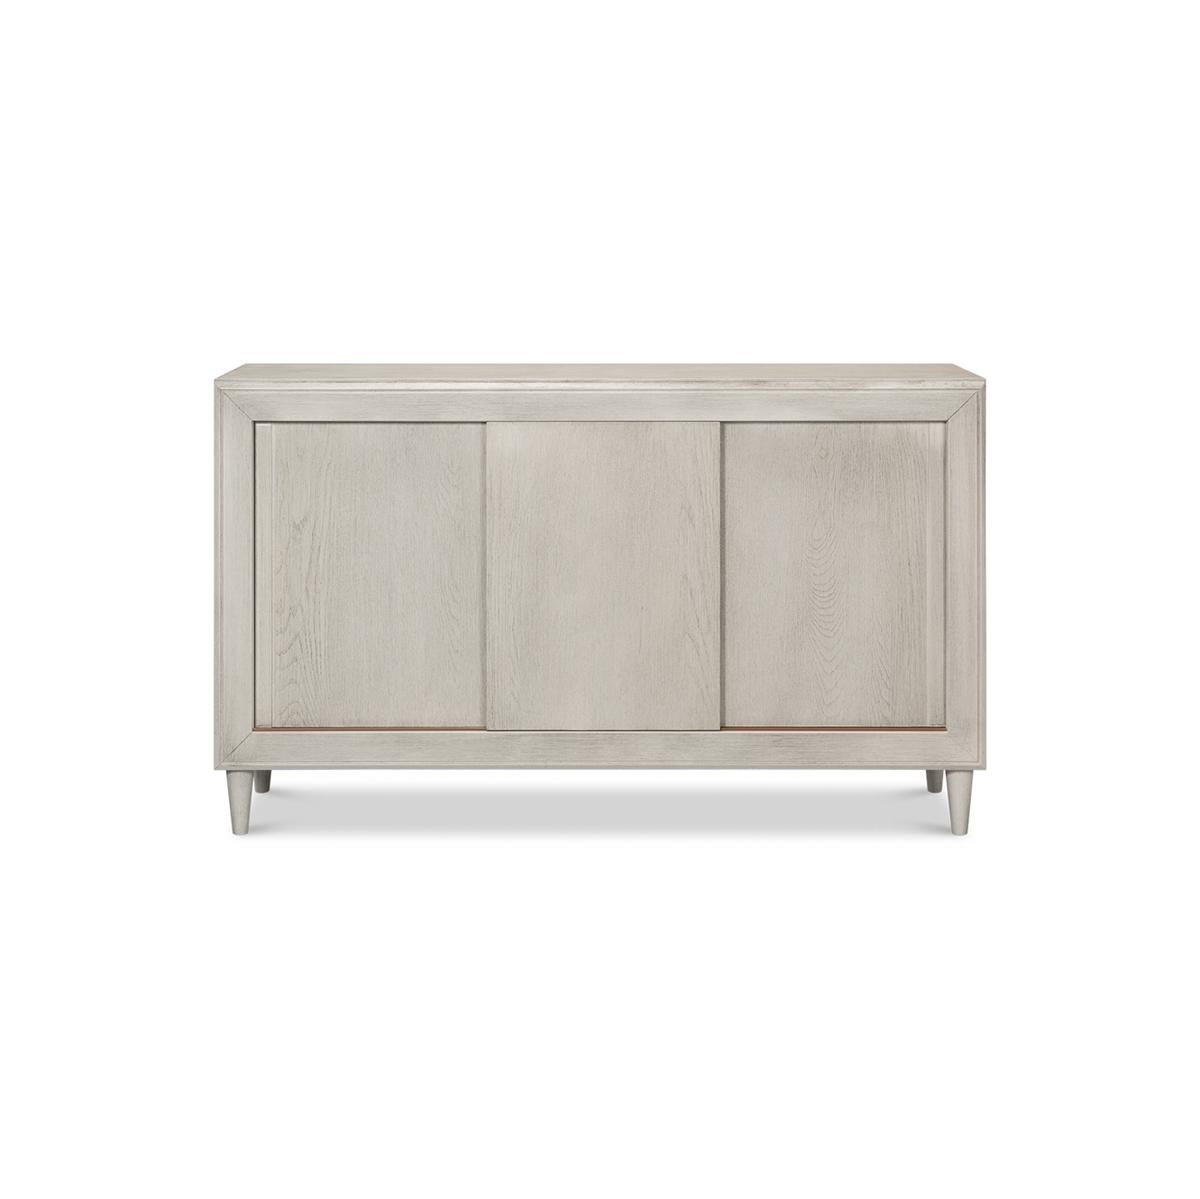 If you're looking for a stylish and versatile piece to elevate your dining or living space, look no further than the Ivory Sliding Door Buffet. Made with poplar and chestnut veneer, this buffet boasts a beautiful ivory contemporary finish that will